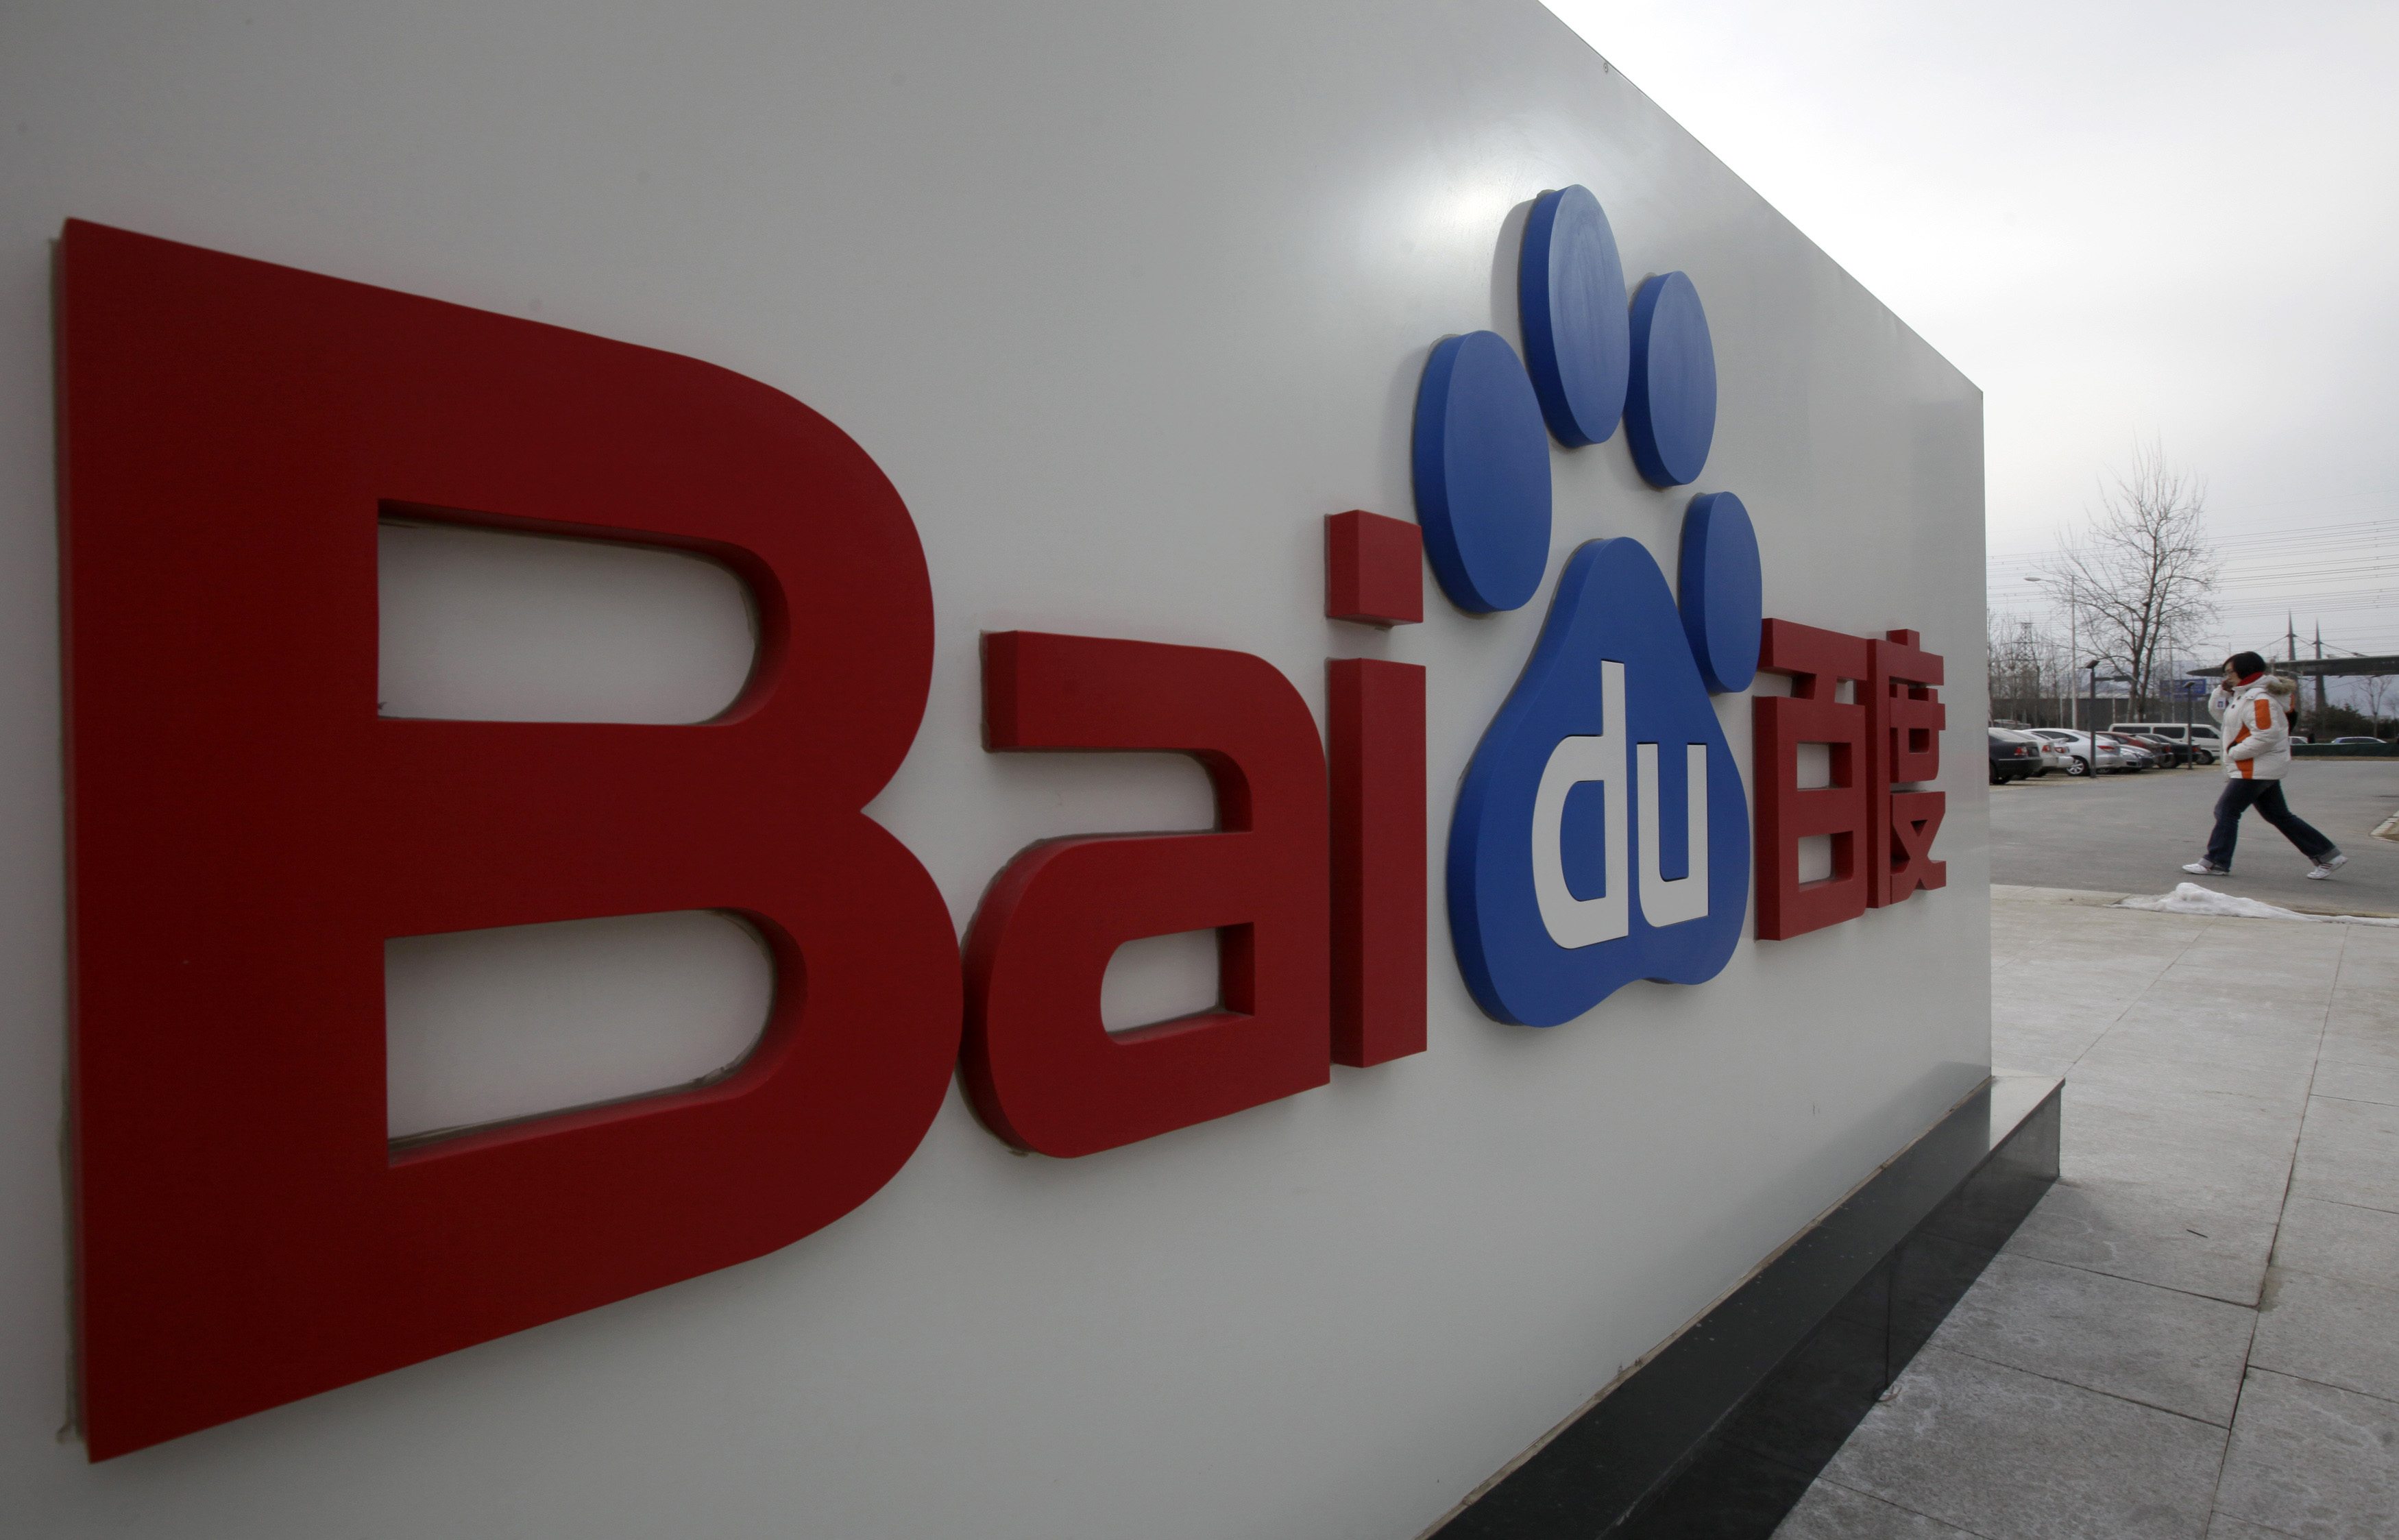 Search engine Baidu formally launches its service in Brazil. Photo: Reuters